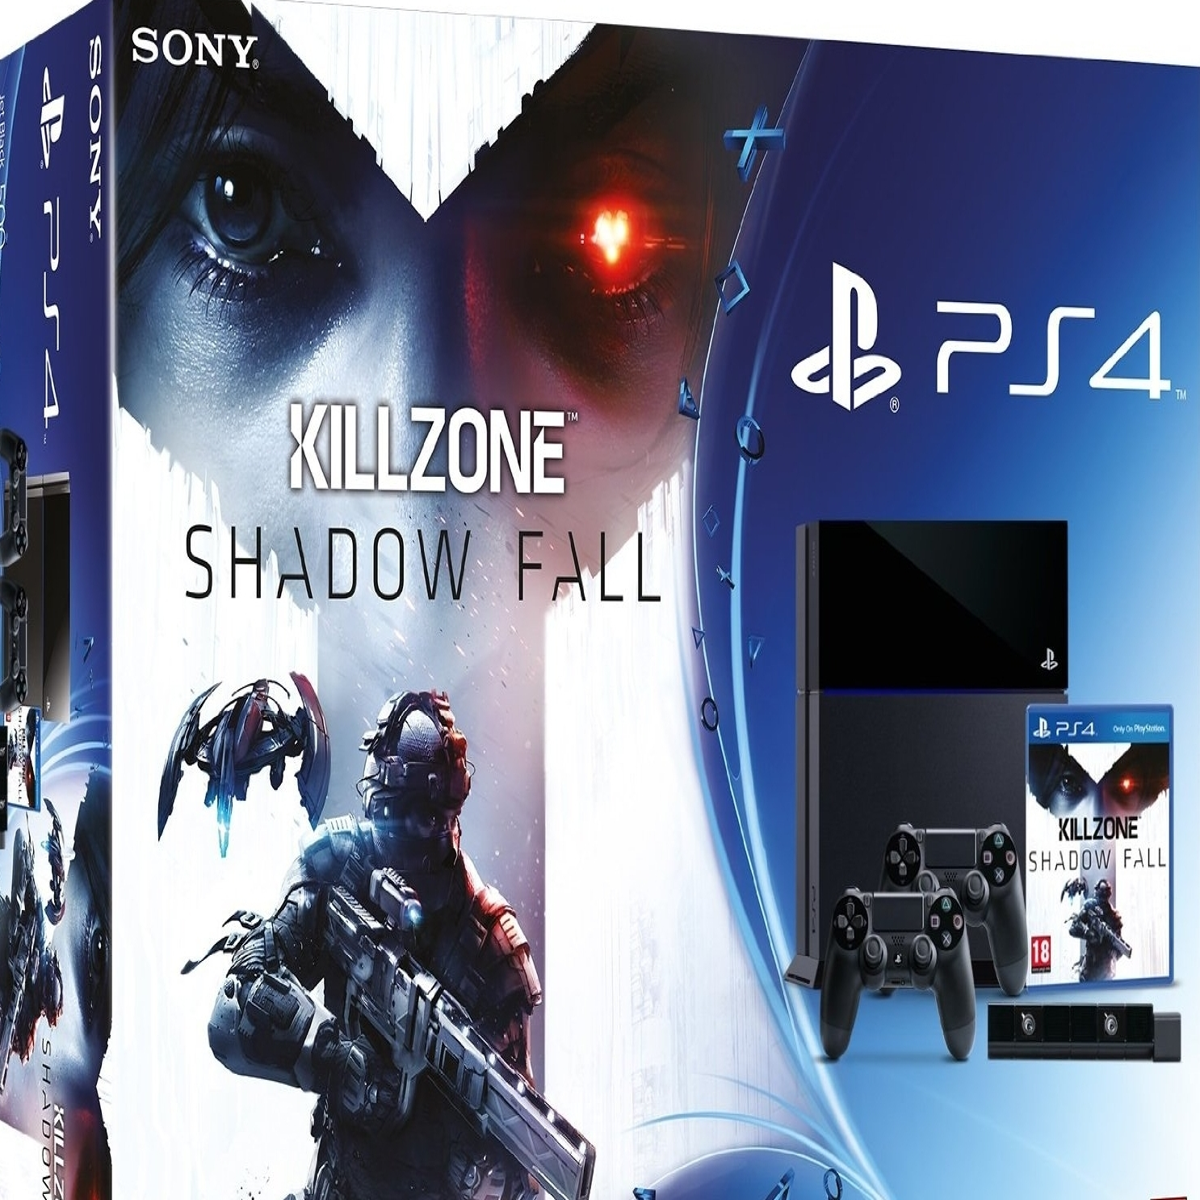 PS4 Killzone: Shadow Fall For PlayStation 4 PS4 Kill Zone : Disc only